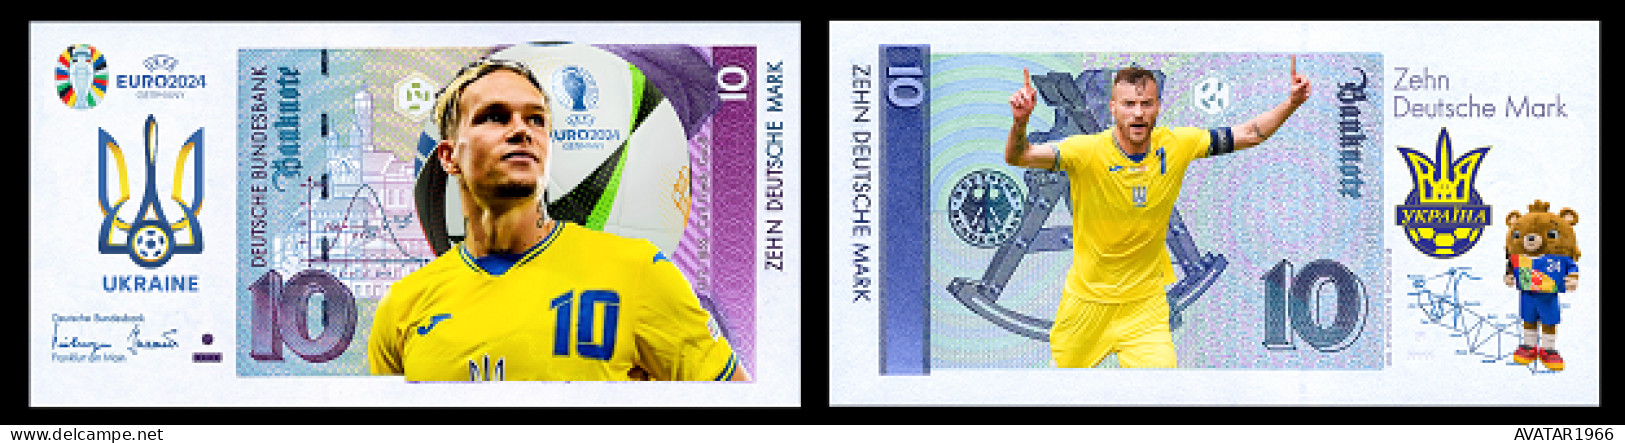 UEFA European Football Championship 2024 Qualified Country Ukraine 8 Pieces Germany Fantasy Paper Money - [15] Commemoratives & Special Issues